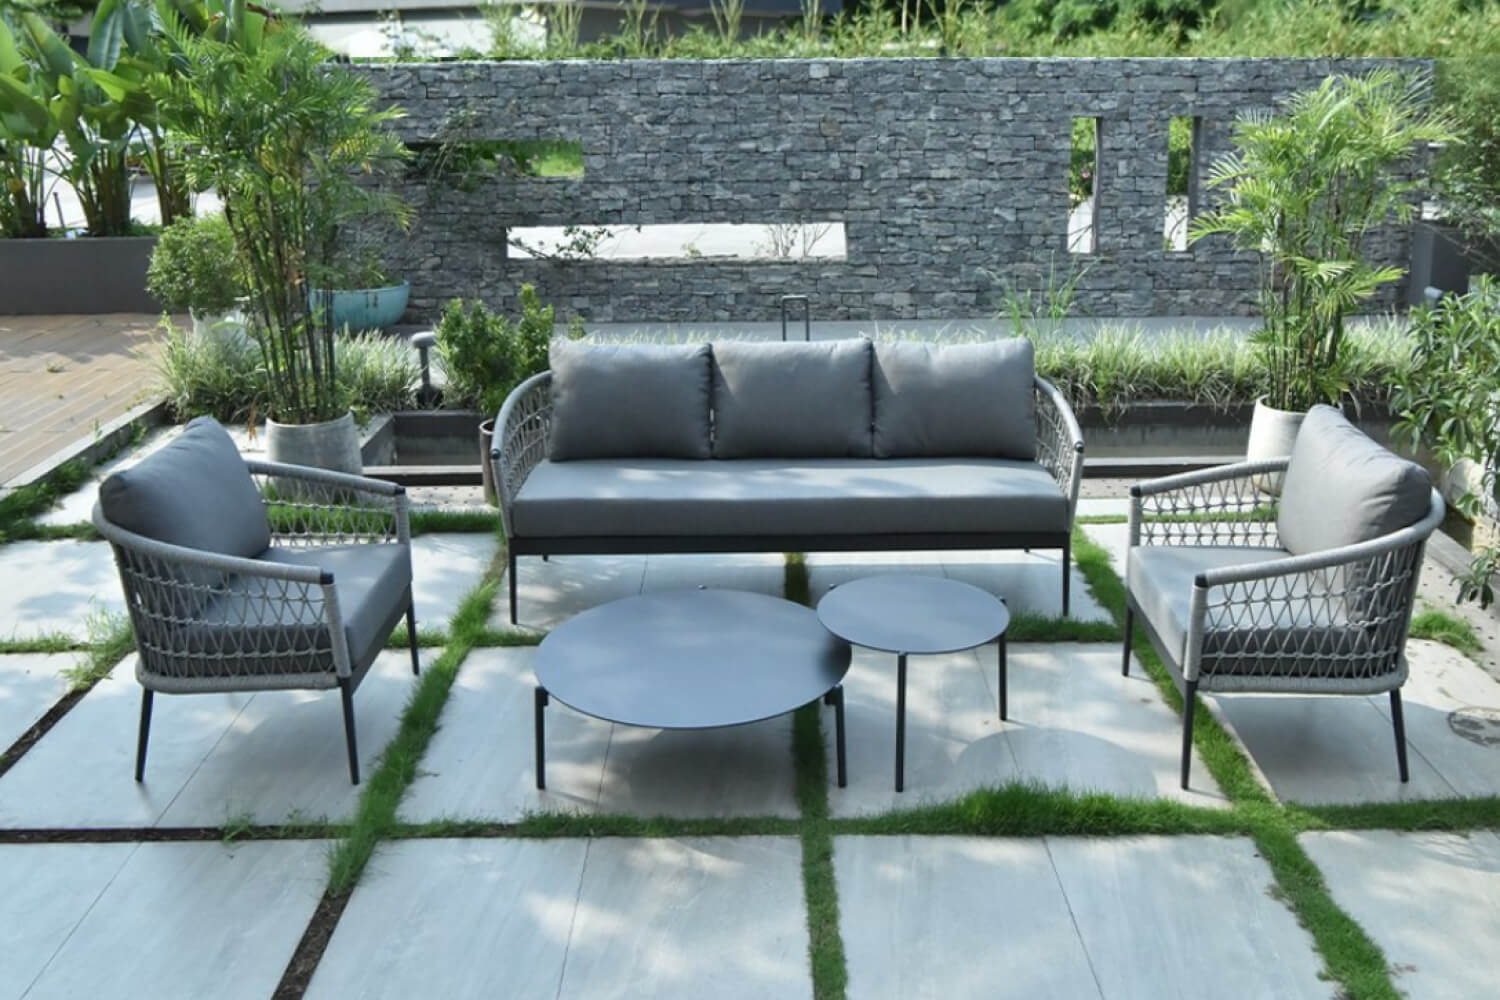 Inviting outdoor patio space with Duxton Grey 5-Piece Rope Weave Patio Sofa Set. The area is surrounded by lush greenery, potted plants, and a stylish stone wall. 